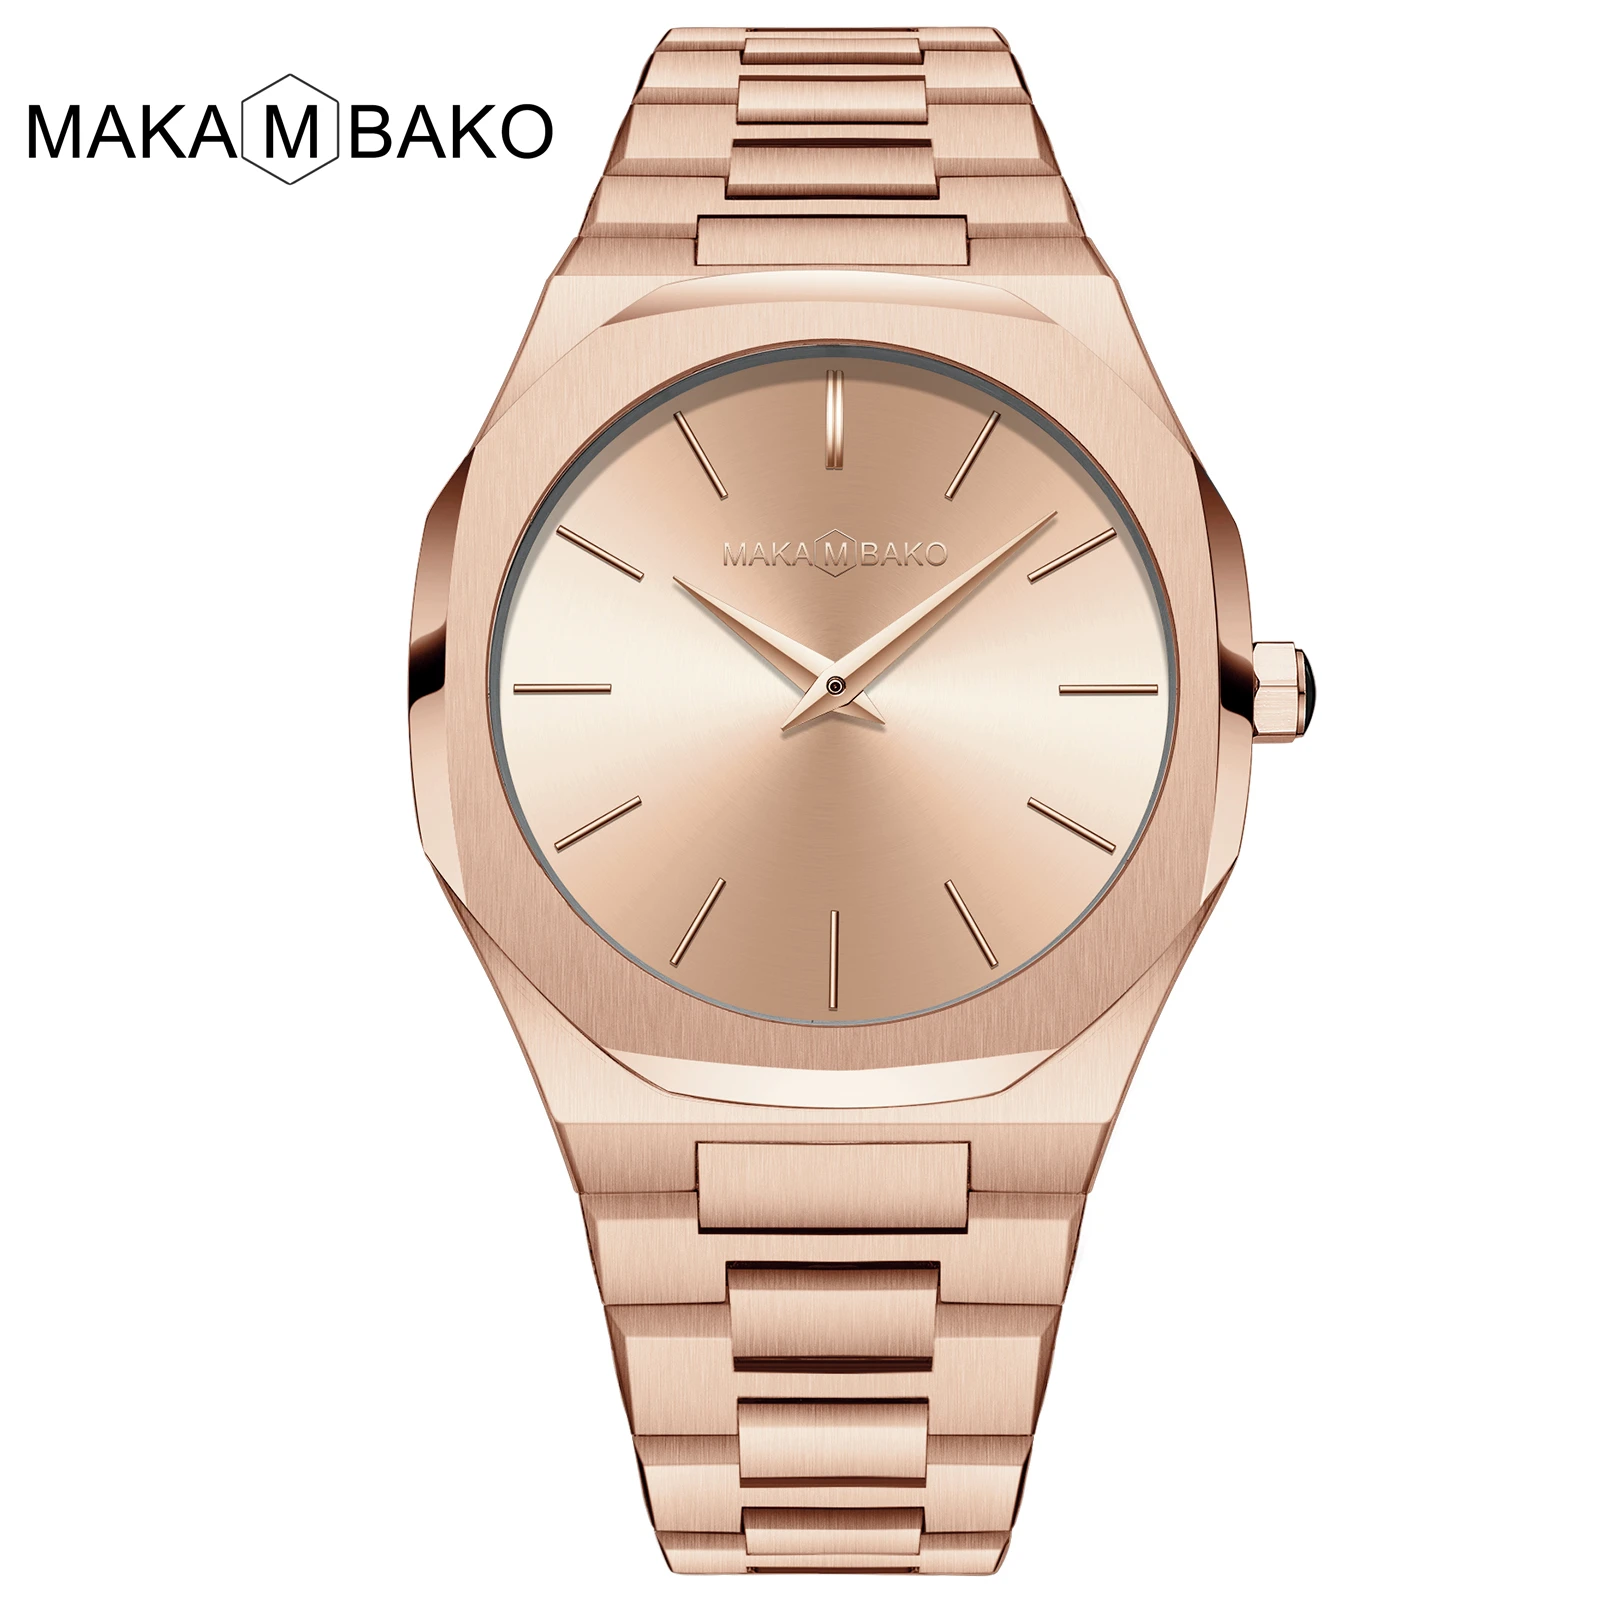 Drop shipping A+ Quality Full Stainless Steel Band Japan Quartz Movement Waterproof Women Rose Gold Ladies Luxury Wrist Watch